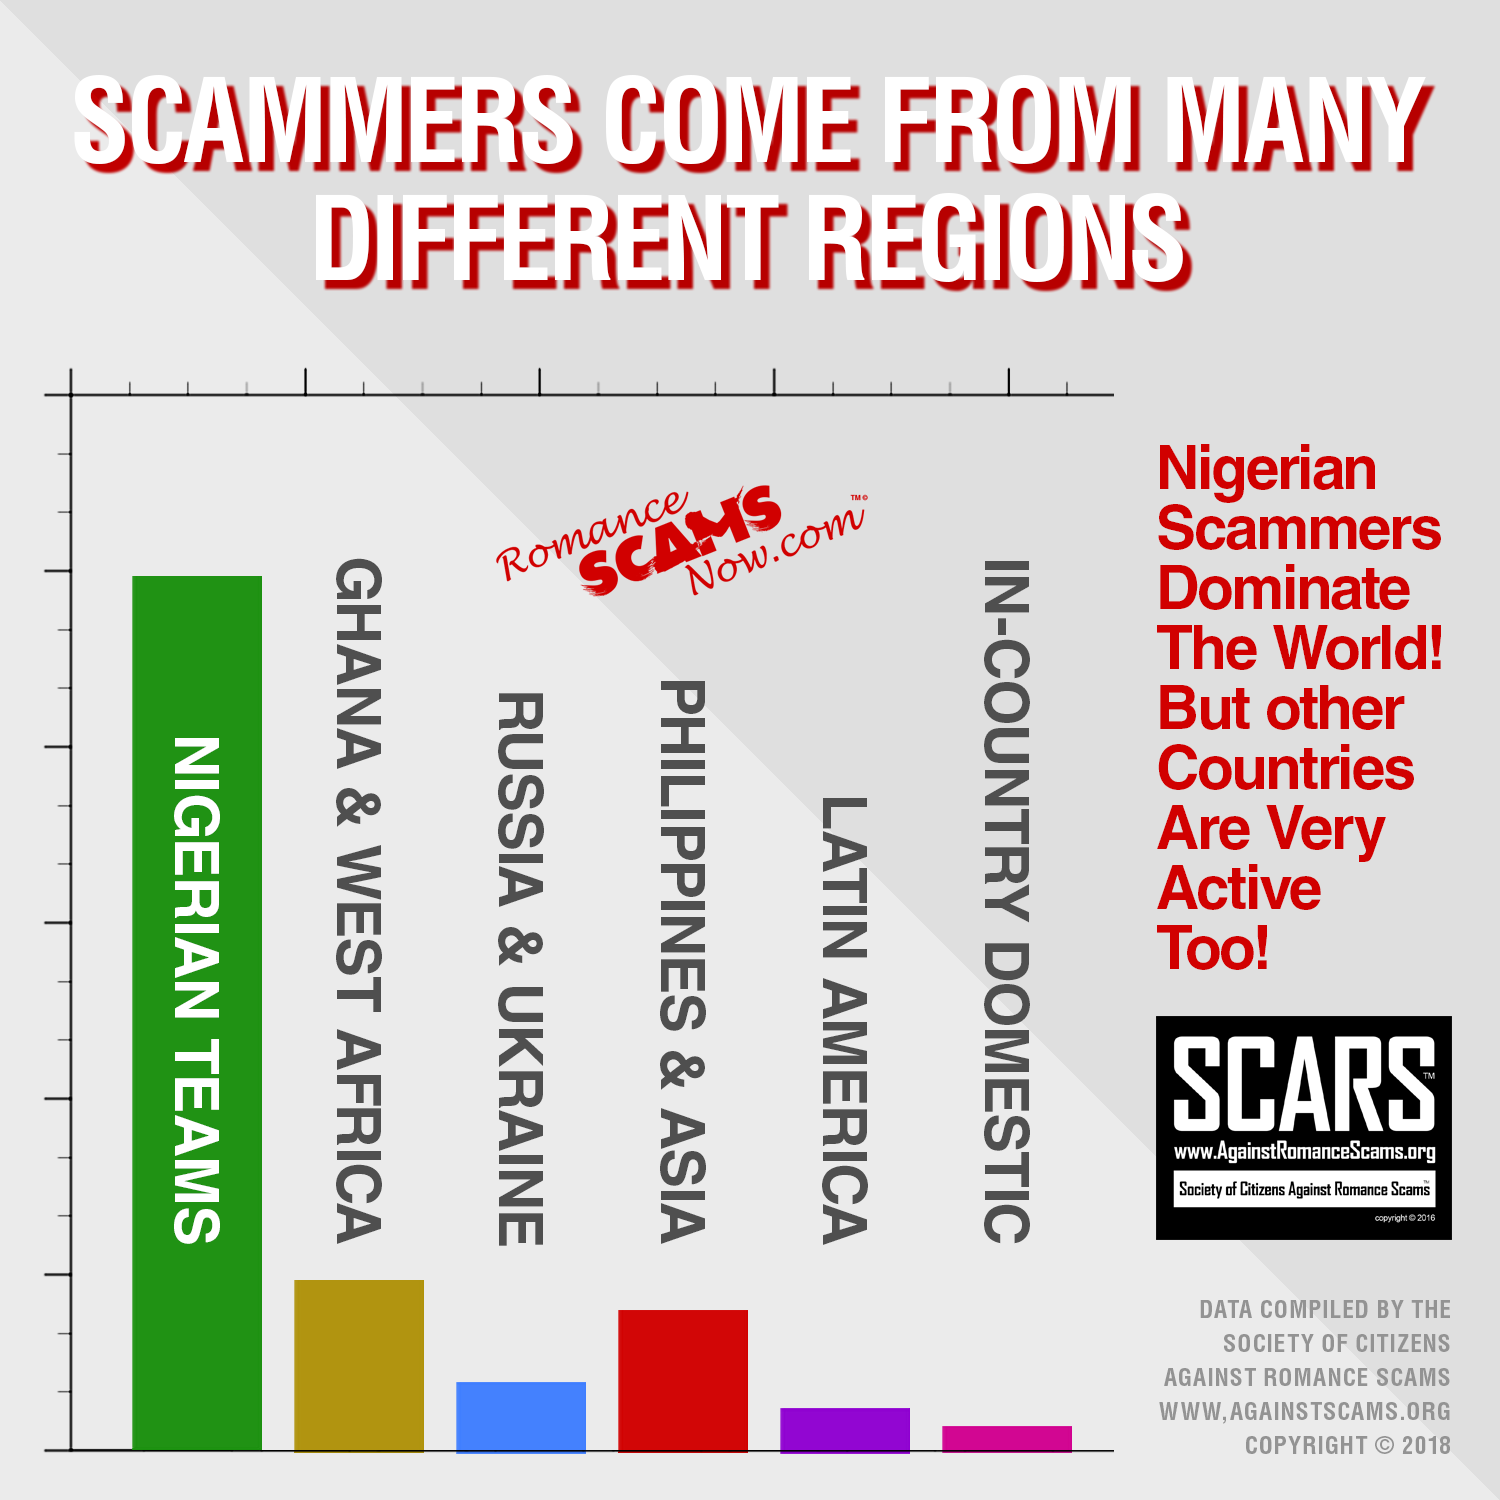 SCAMMERS COME FROM MANY DIFFERENT REGIONS